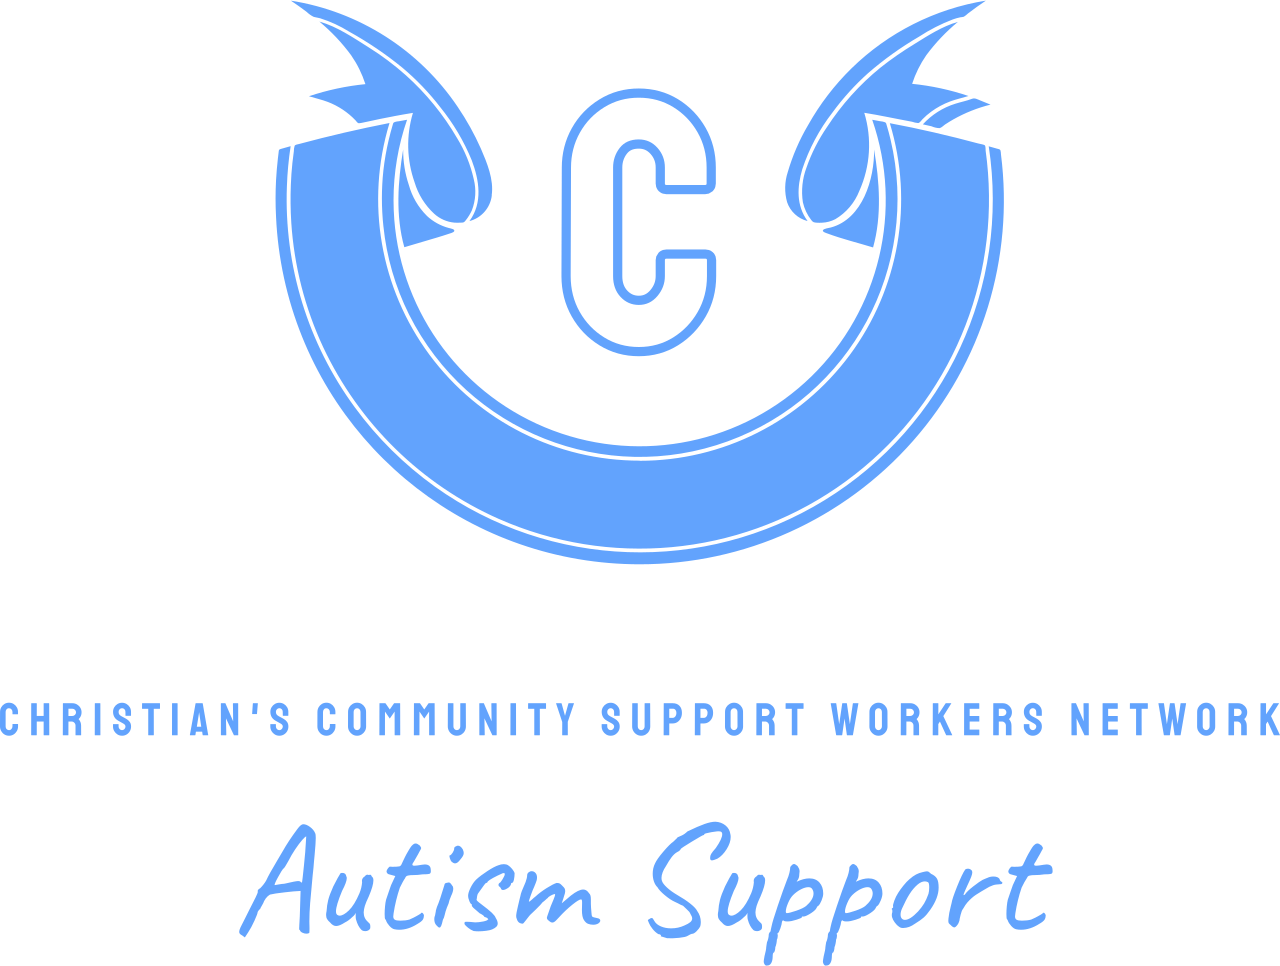 Christian's Community Support Workers Network's logo